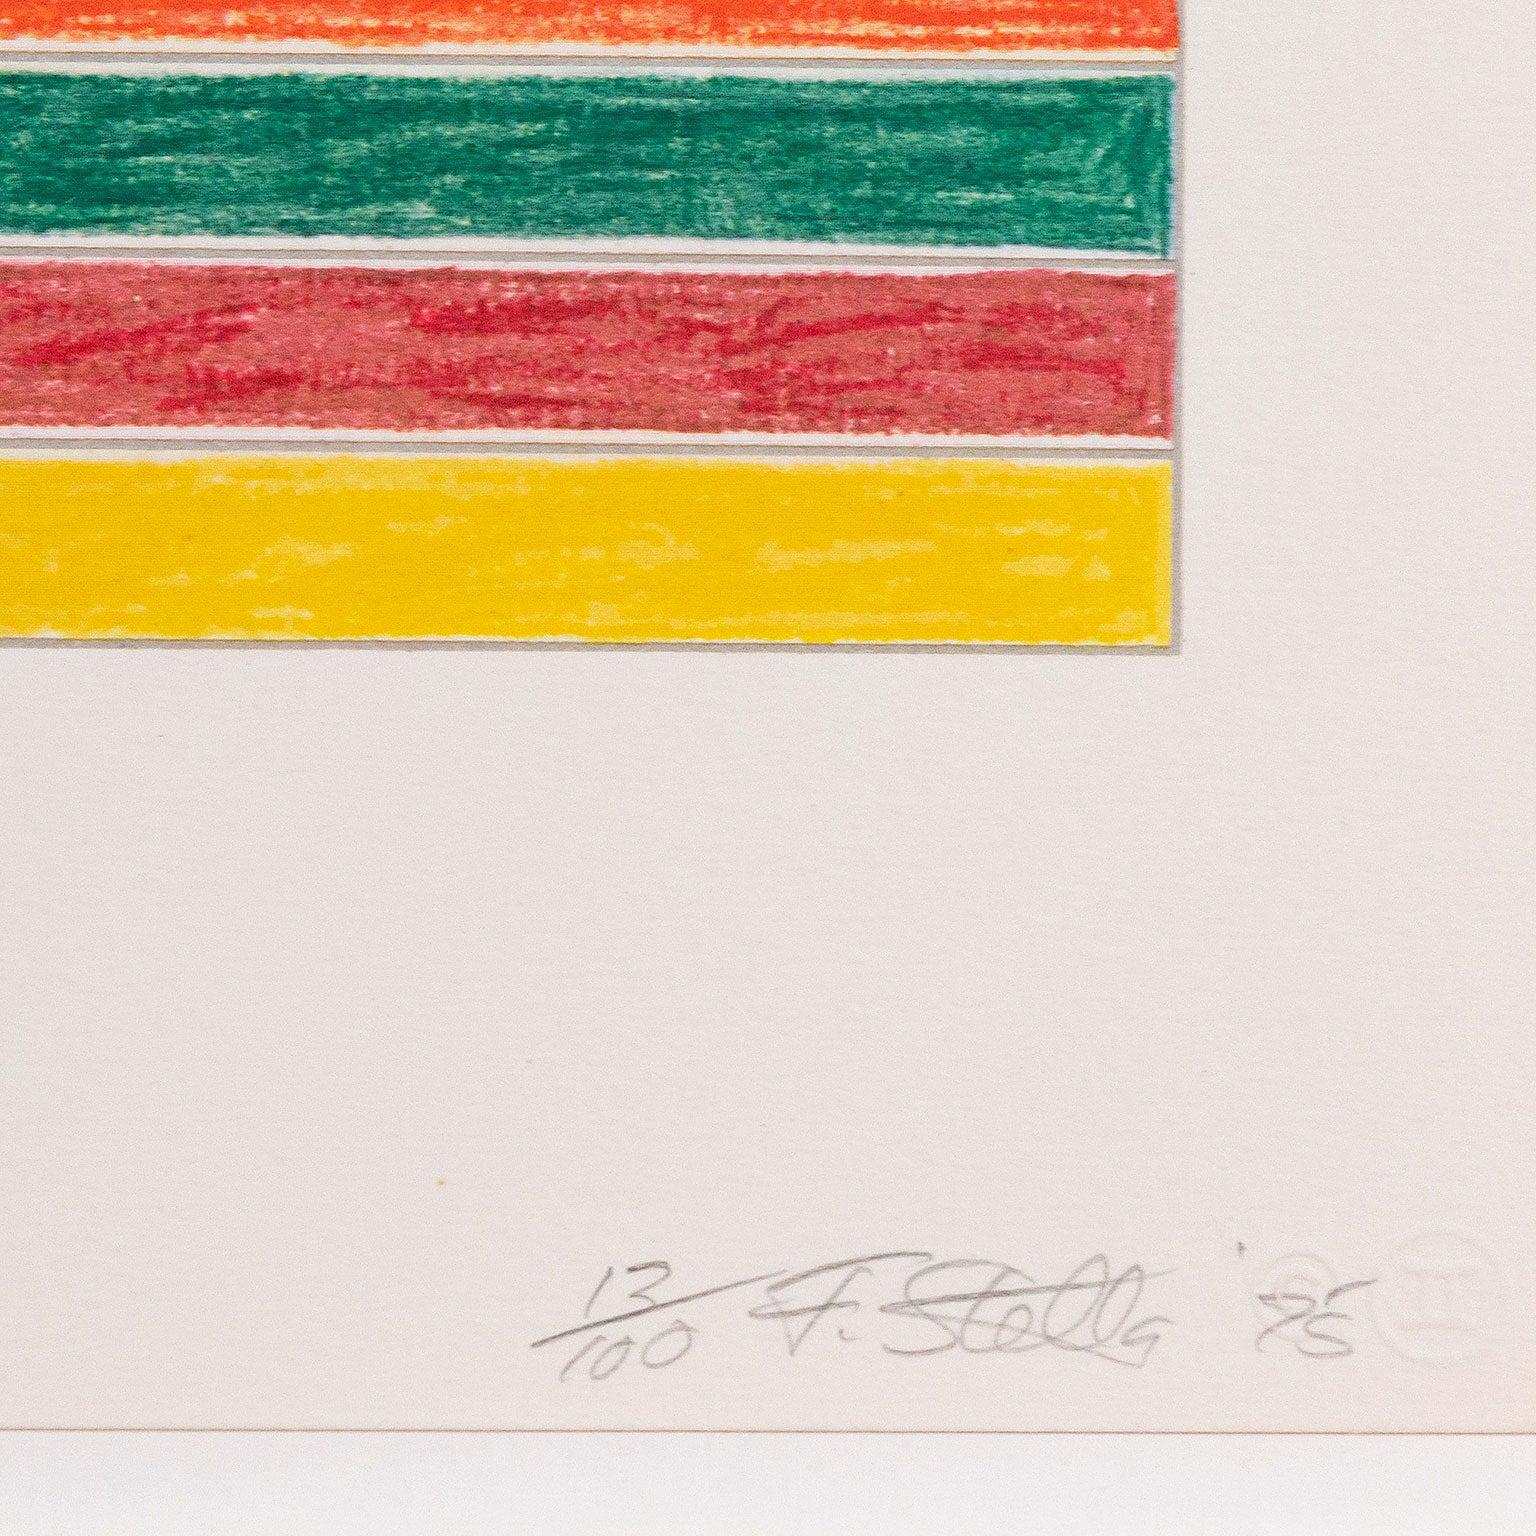 Caviar20 is proud to be offering this distinctive Frank Stella work, one of the most sought-after pieces from the 